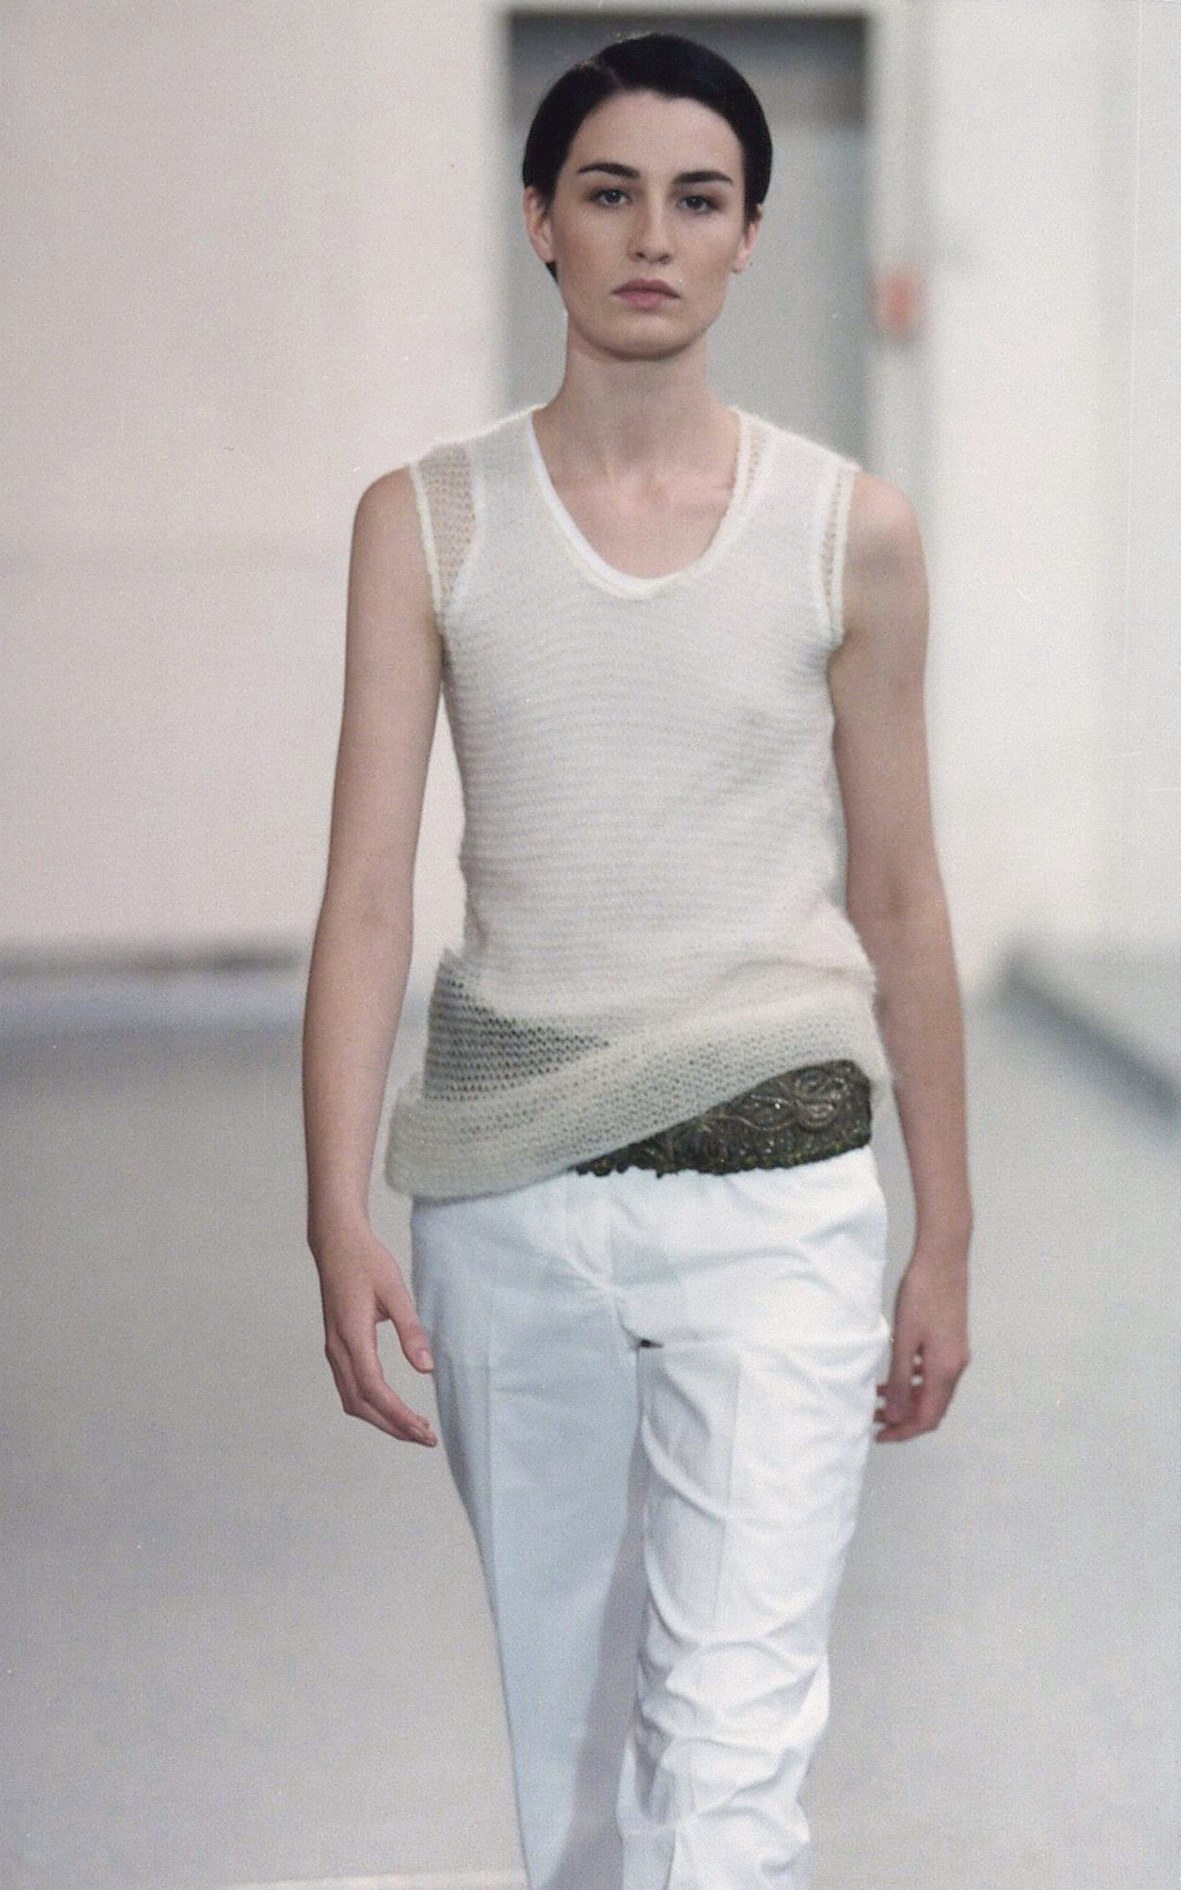 Layered, sheer white tank top in the Helmut Lang Spring/Summer 1999 News  Photo - Getty Images